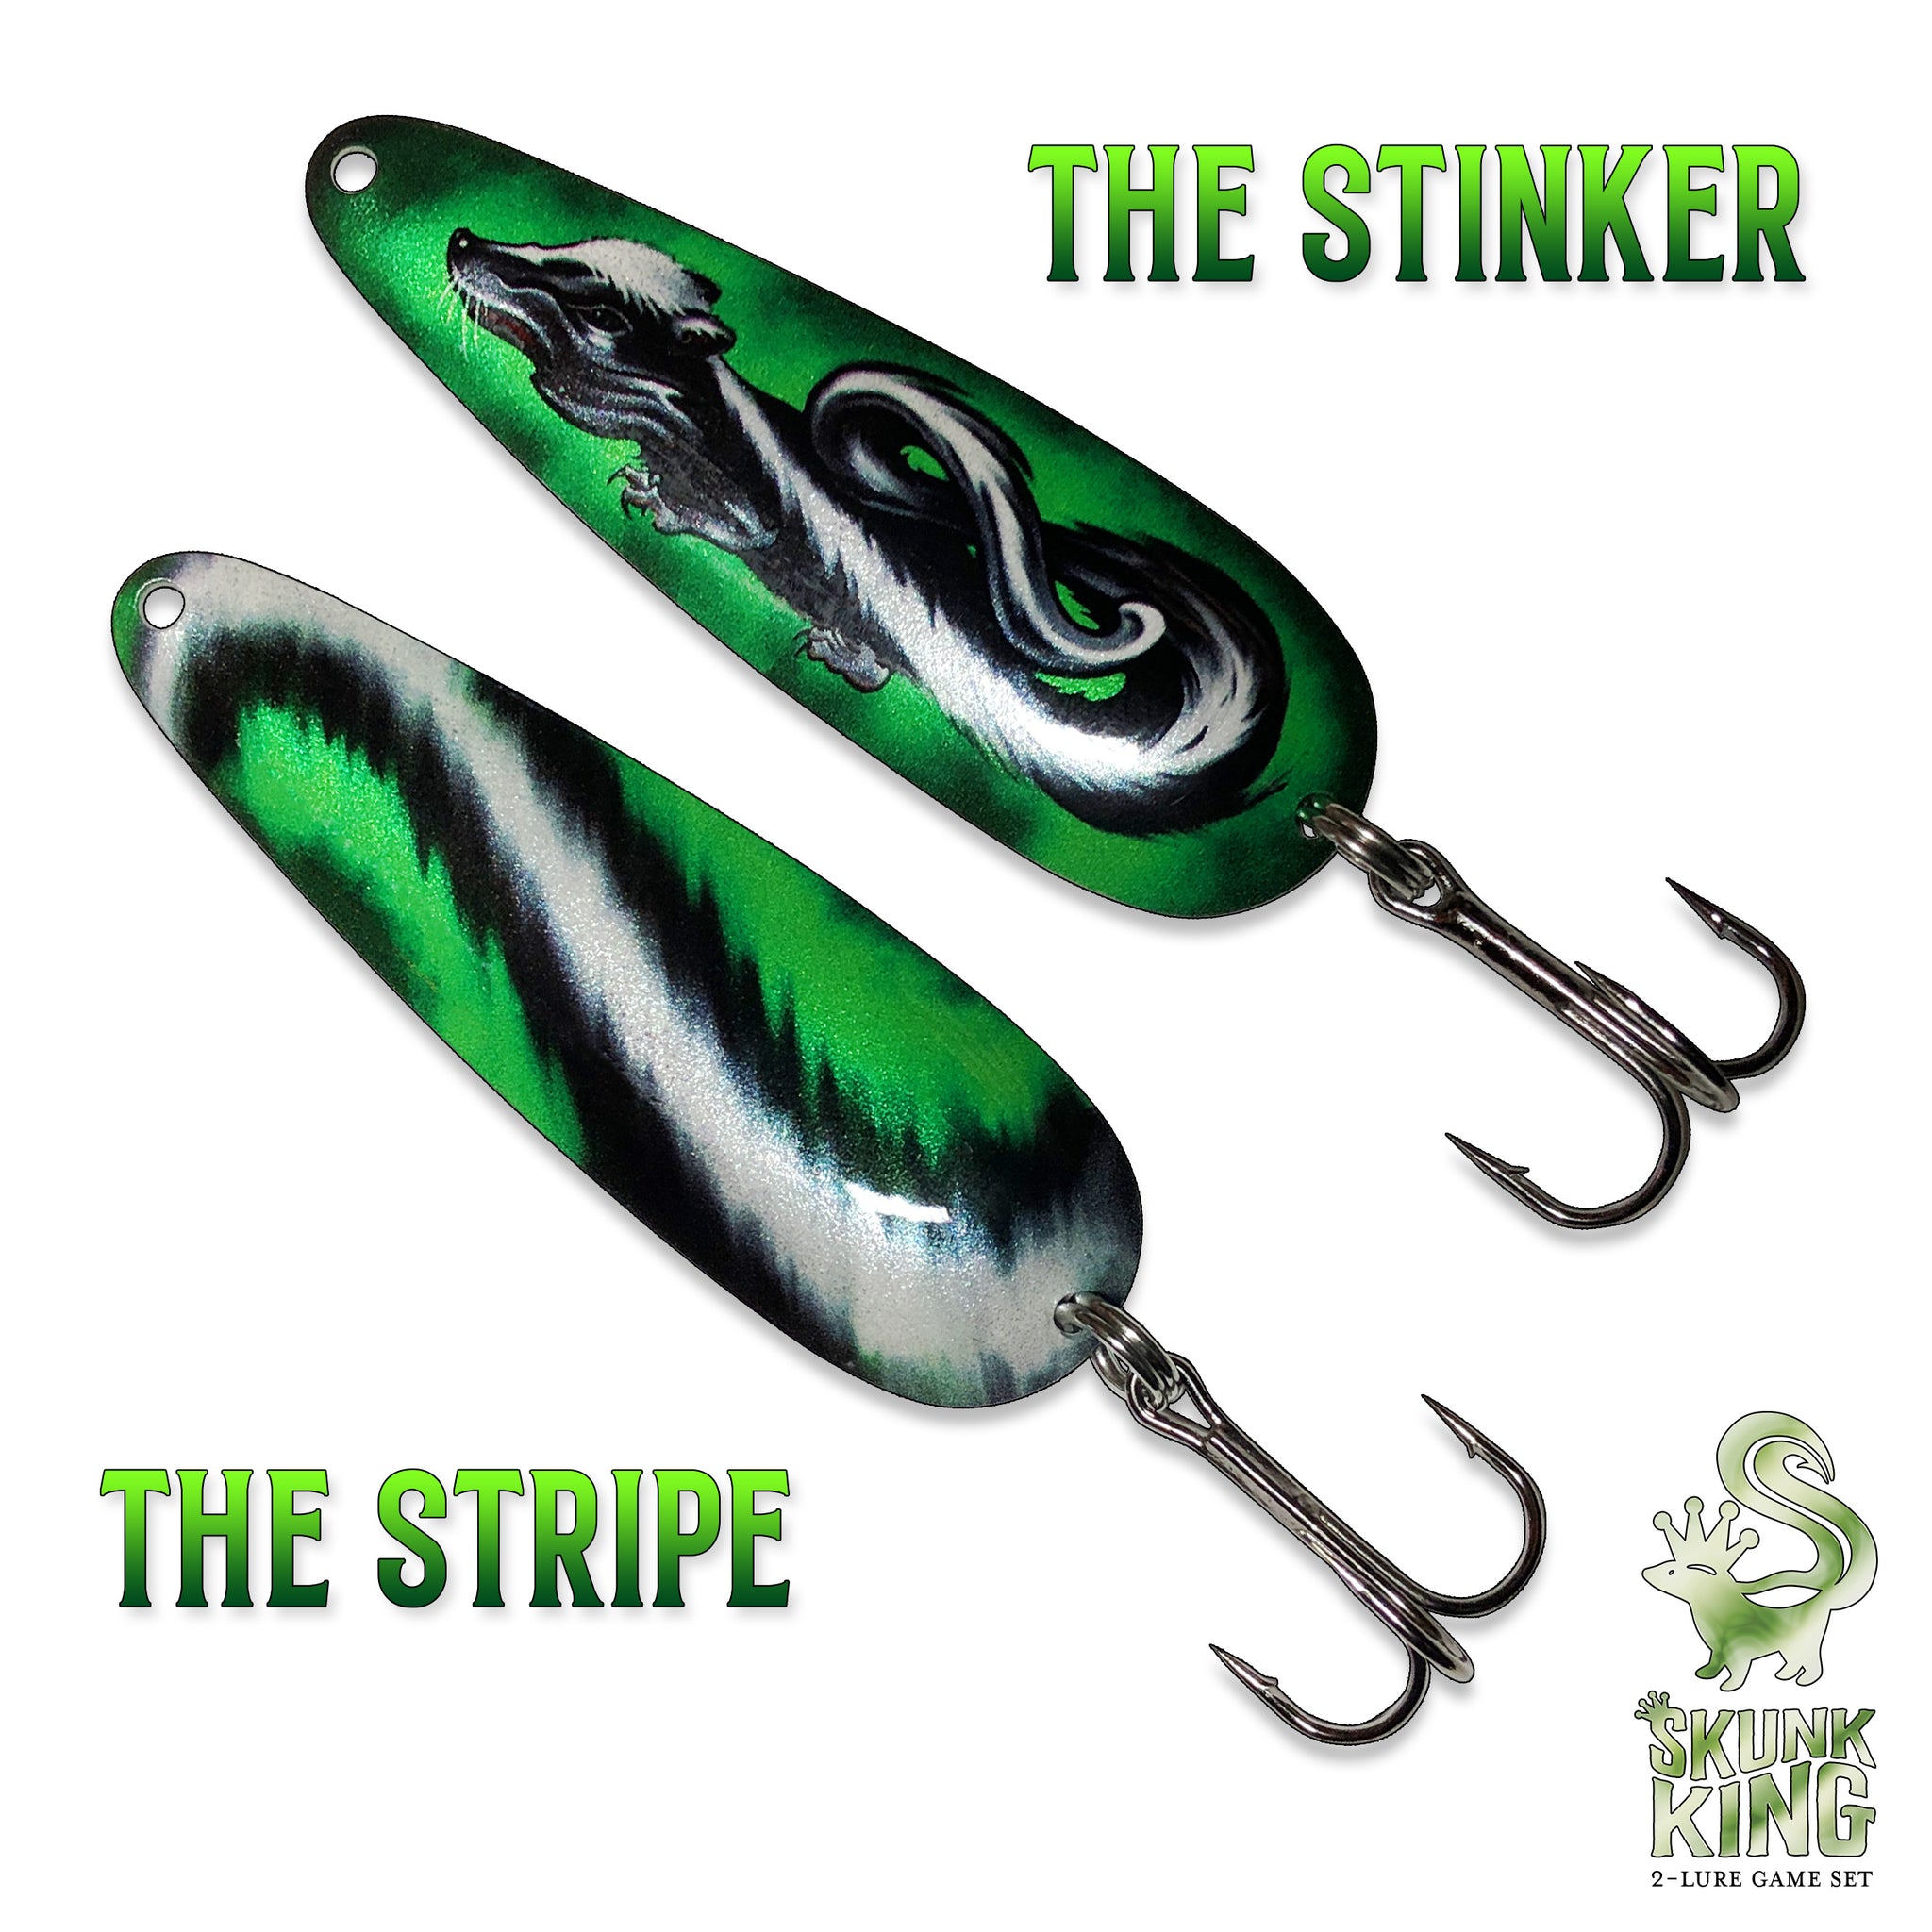 The Skunk King - 2 Lure Fishing Game Set – Fin & Ink Lures